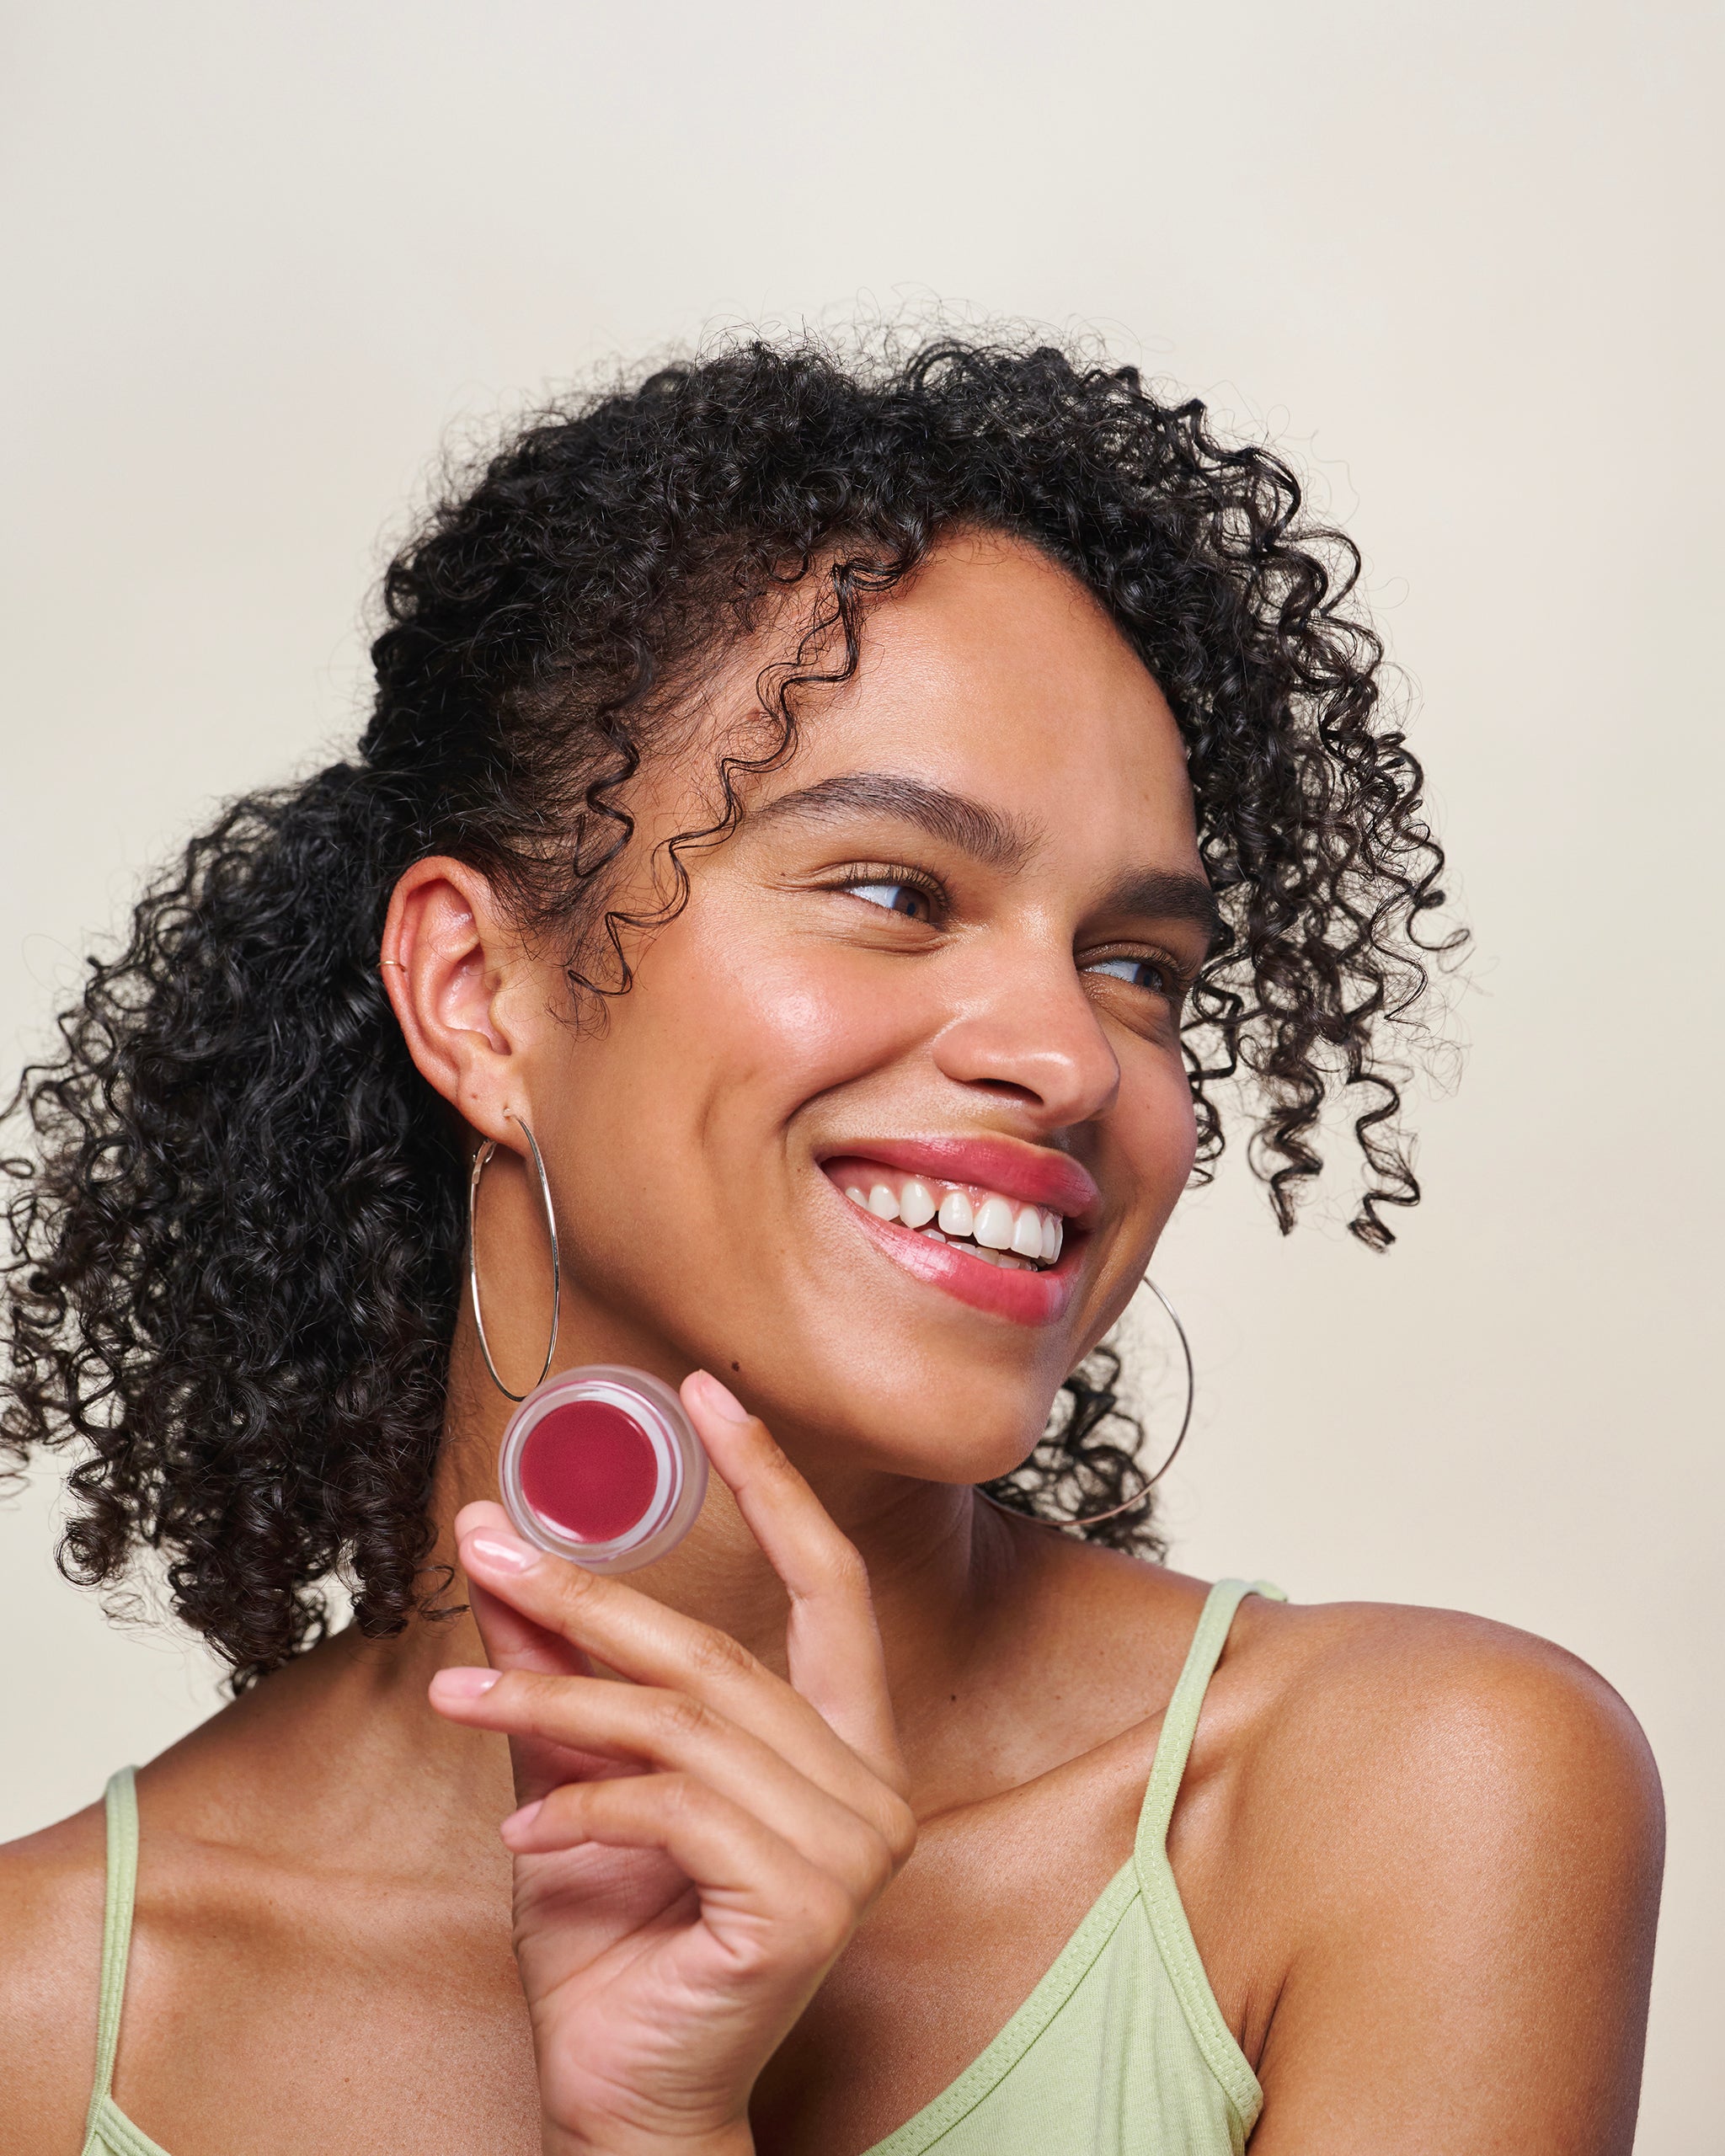 Model smiling and holding Cheek & Lip Tint, with gray background